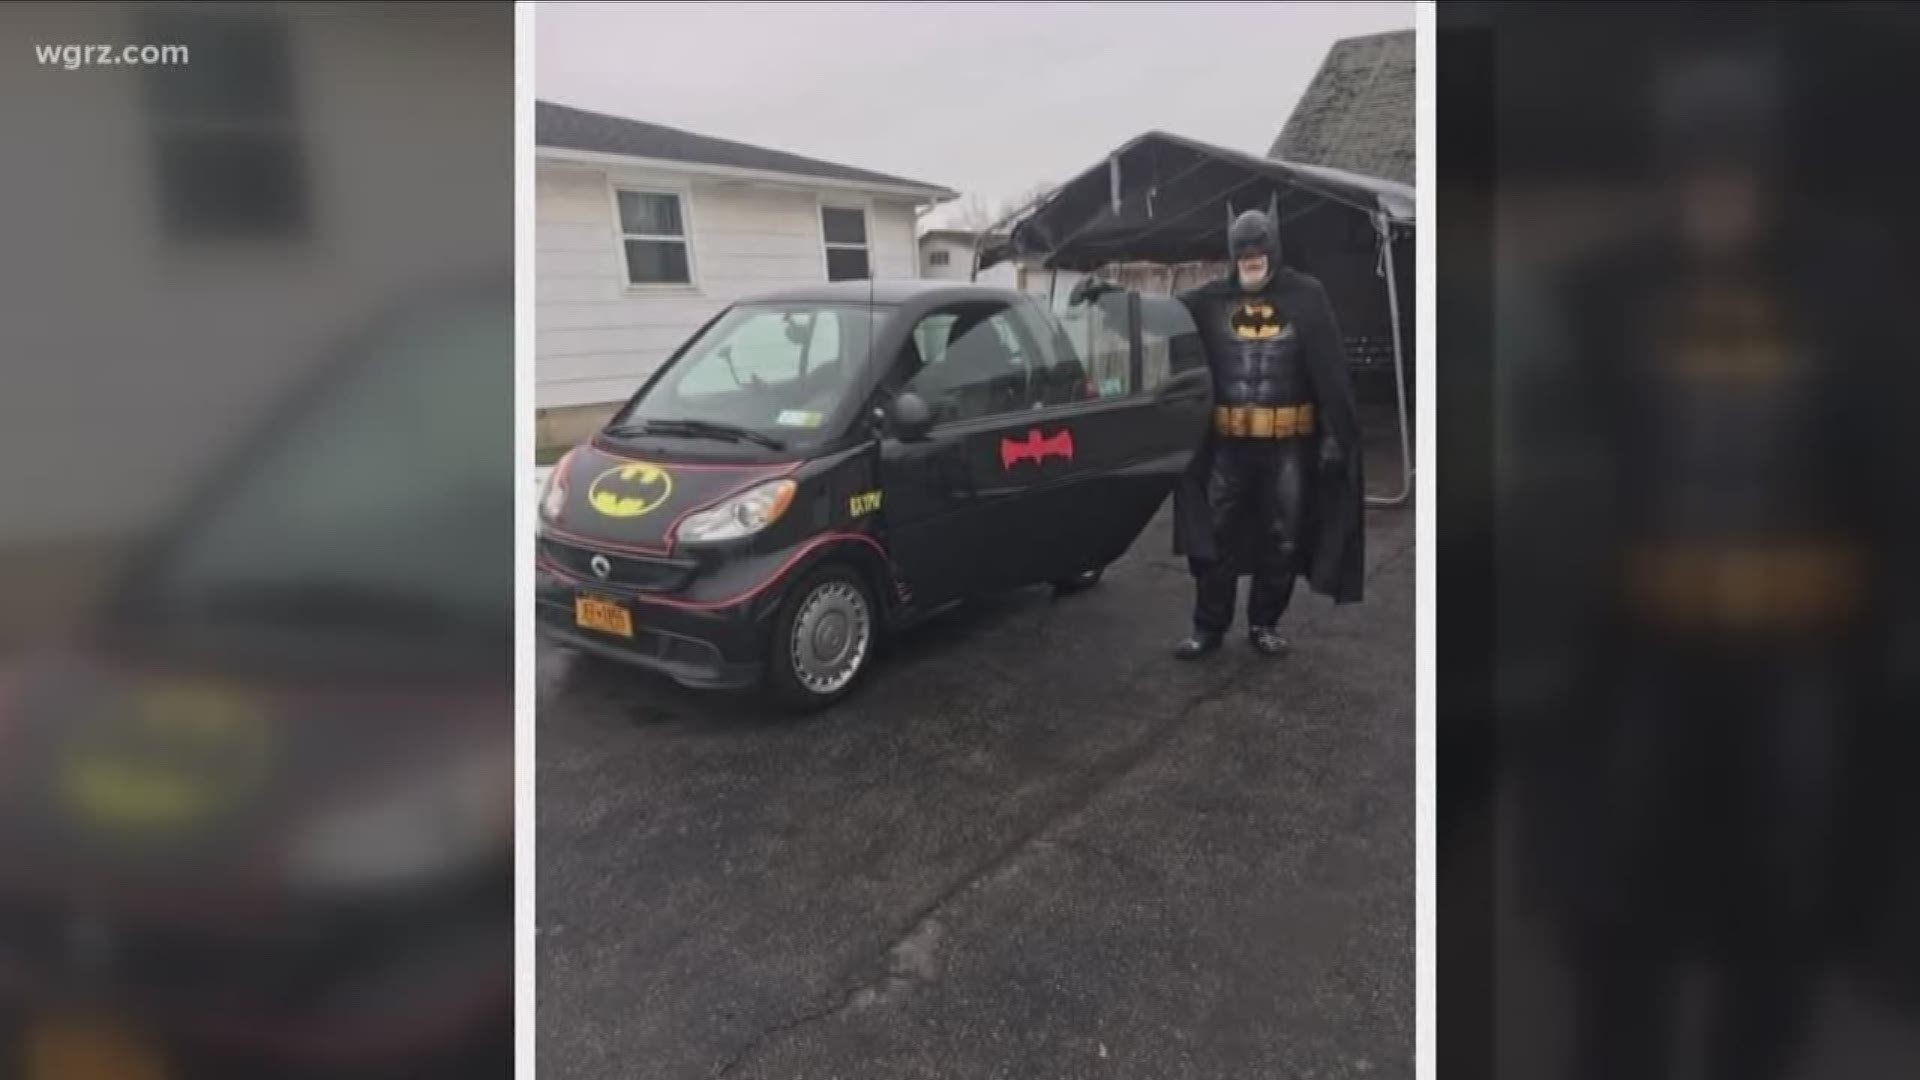 From Gotham To Buffalo: Bat Pop Saves The Day